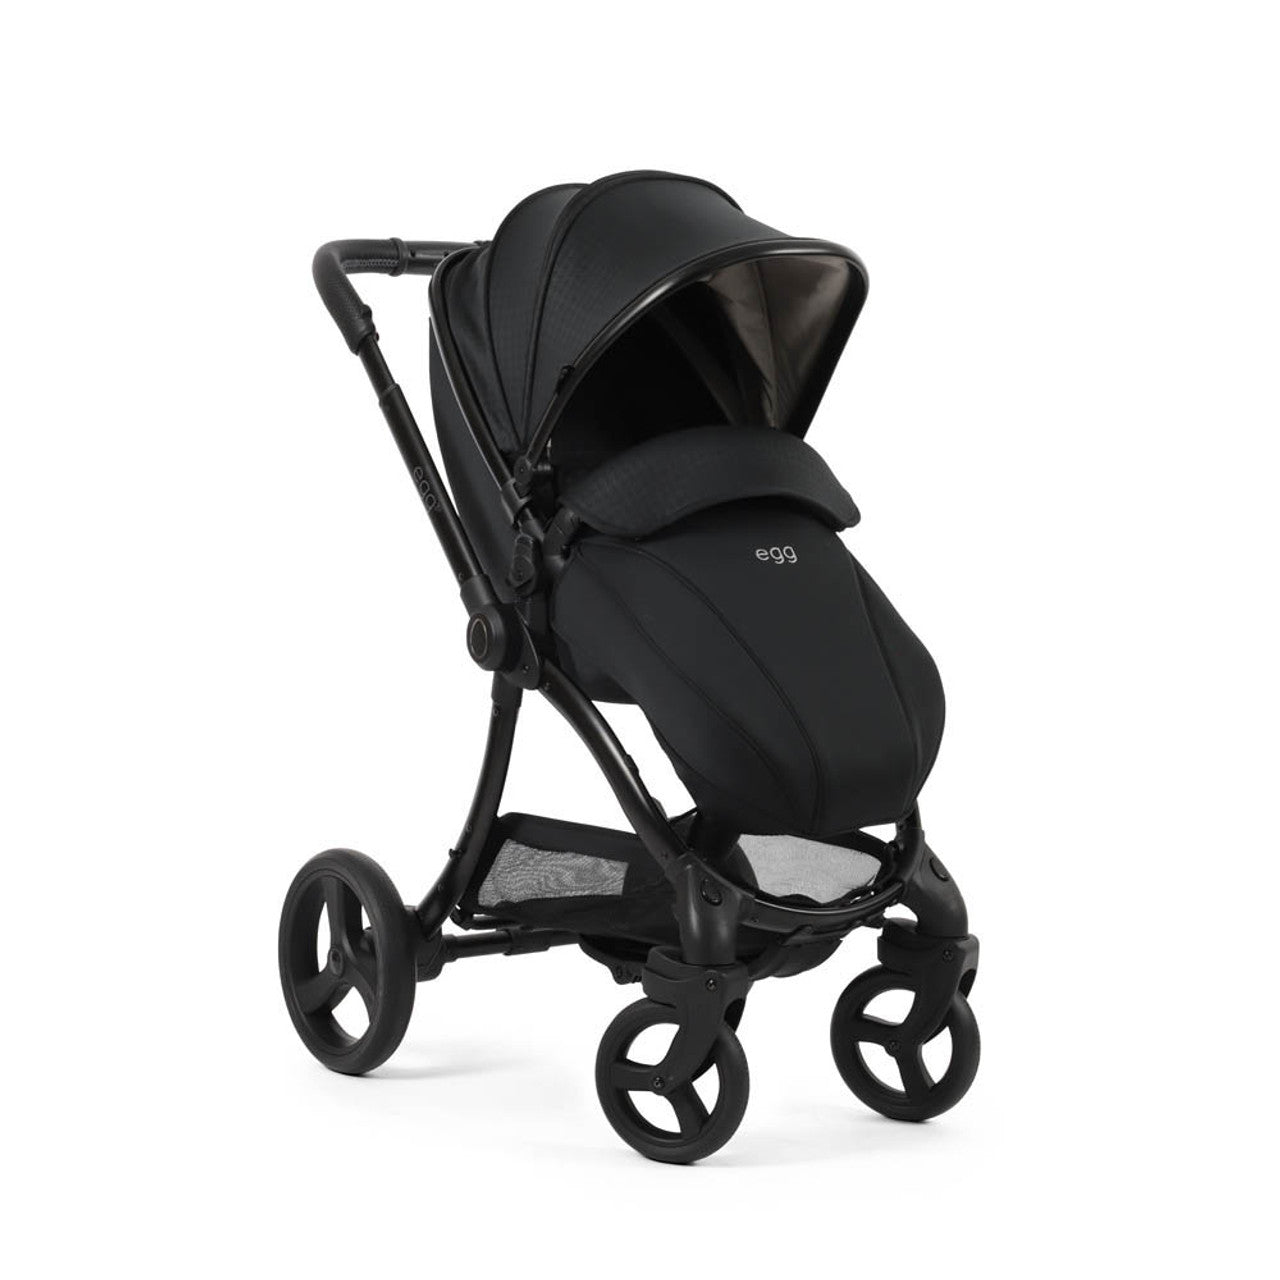 Egg® 3 Pushchair + Carrycot 2 in 1 Pram Special Edition - Houndstooth Black -  | For Your Little One